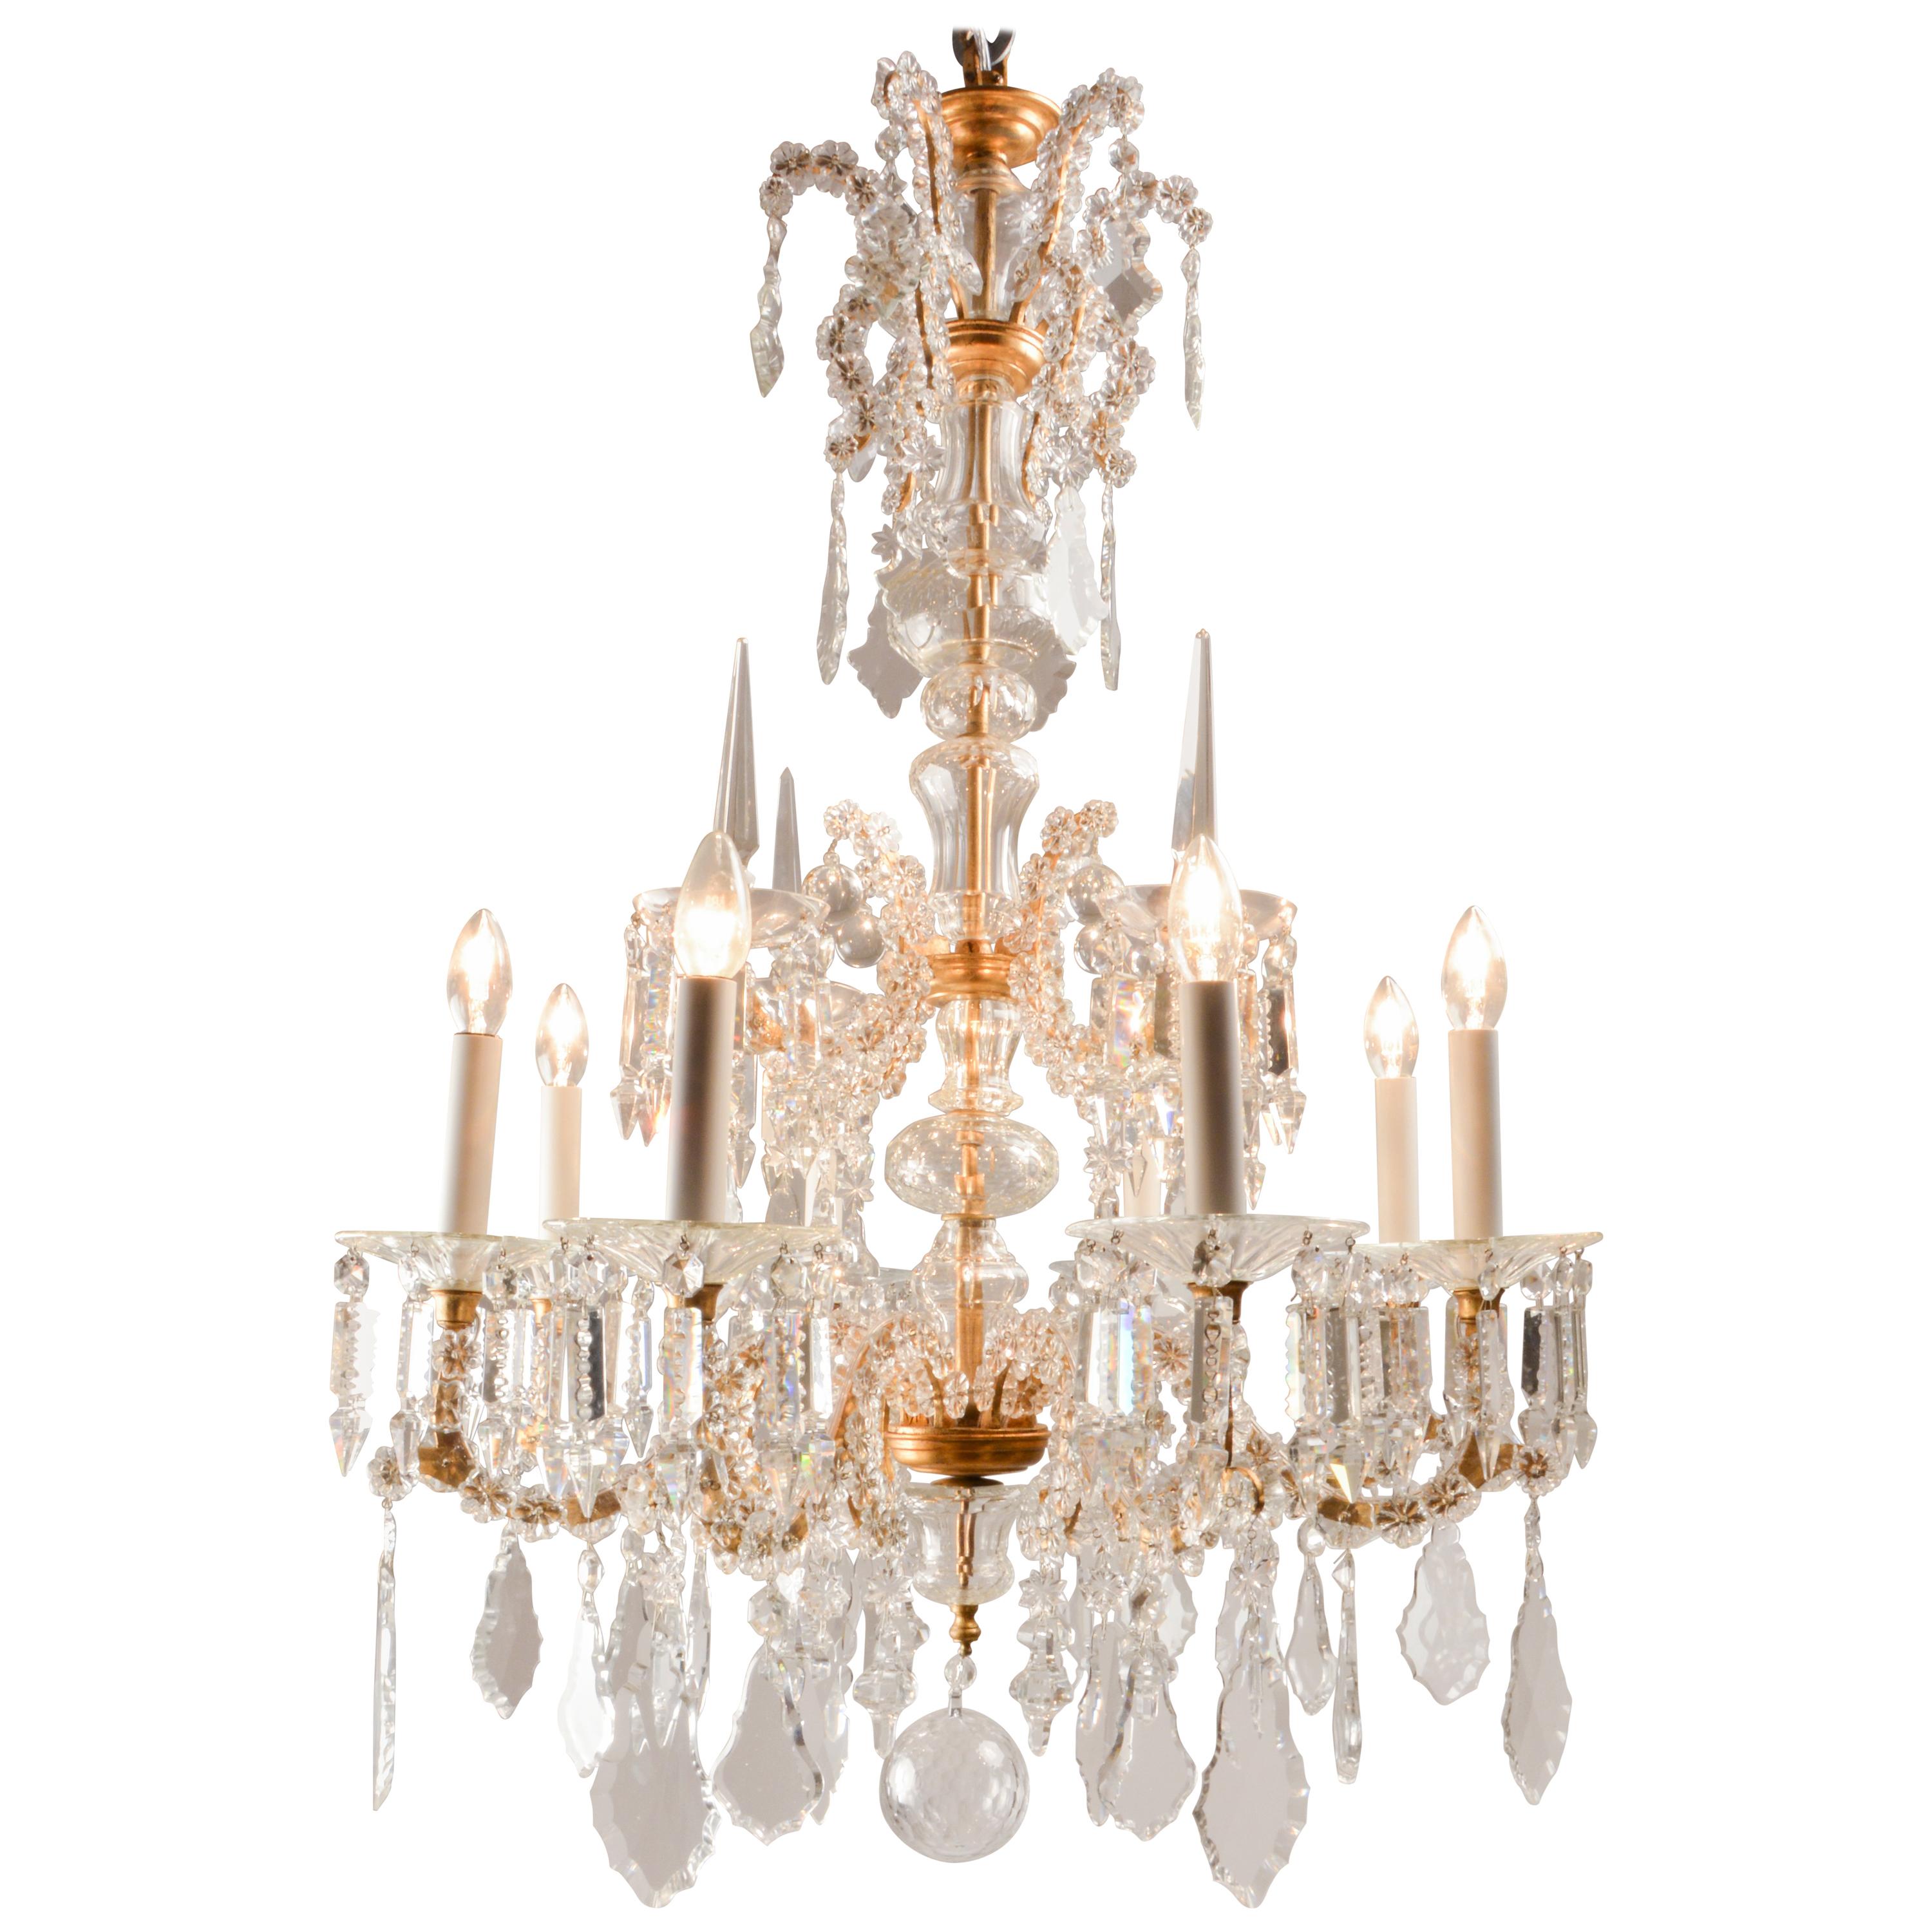 Lobmeyr Historism Six-Arm Crystal Wrought Iron Chandelier with Feaf-Gilded Frame For Sale